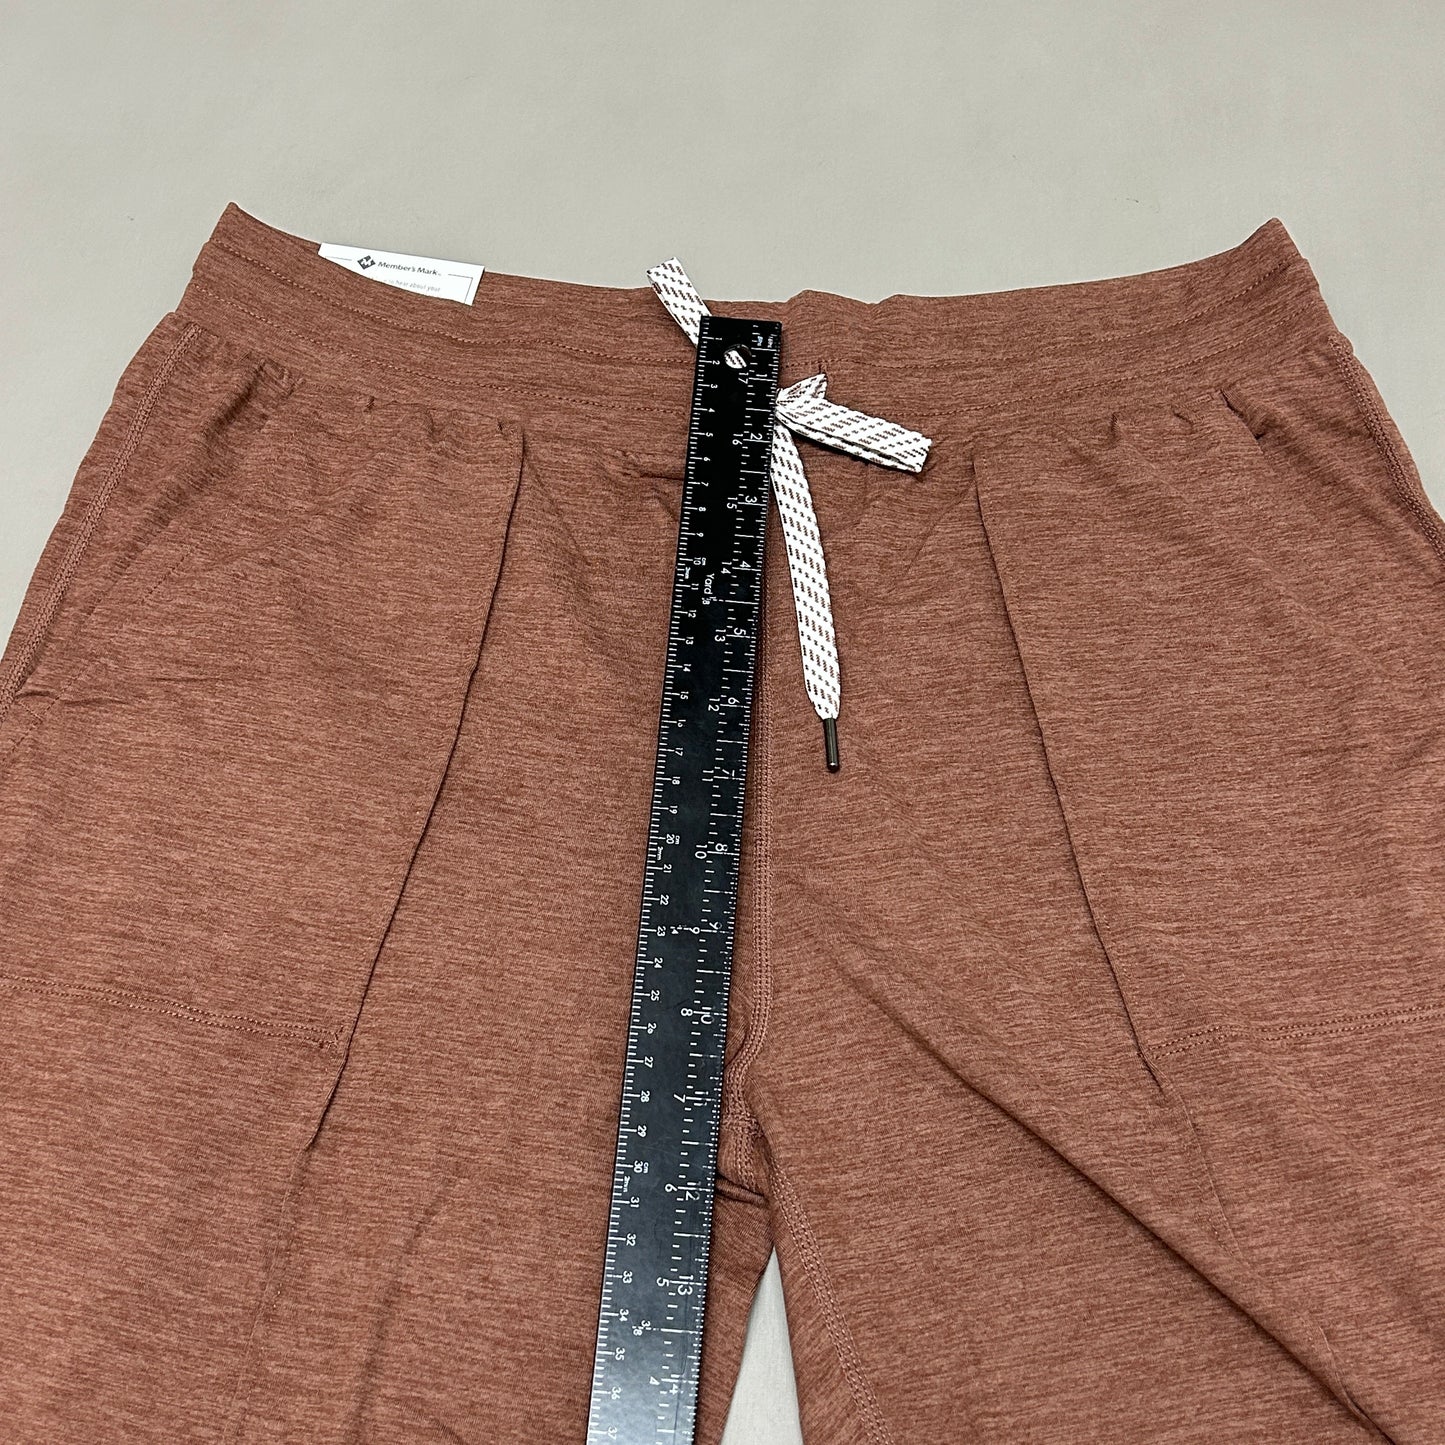 MEMBERS MARK Favorite Straight Leg Soft Pant Brown Size X-Large (New)